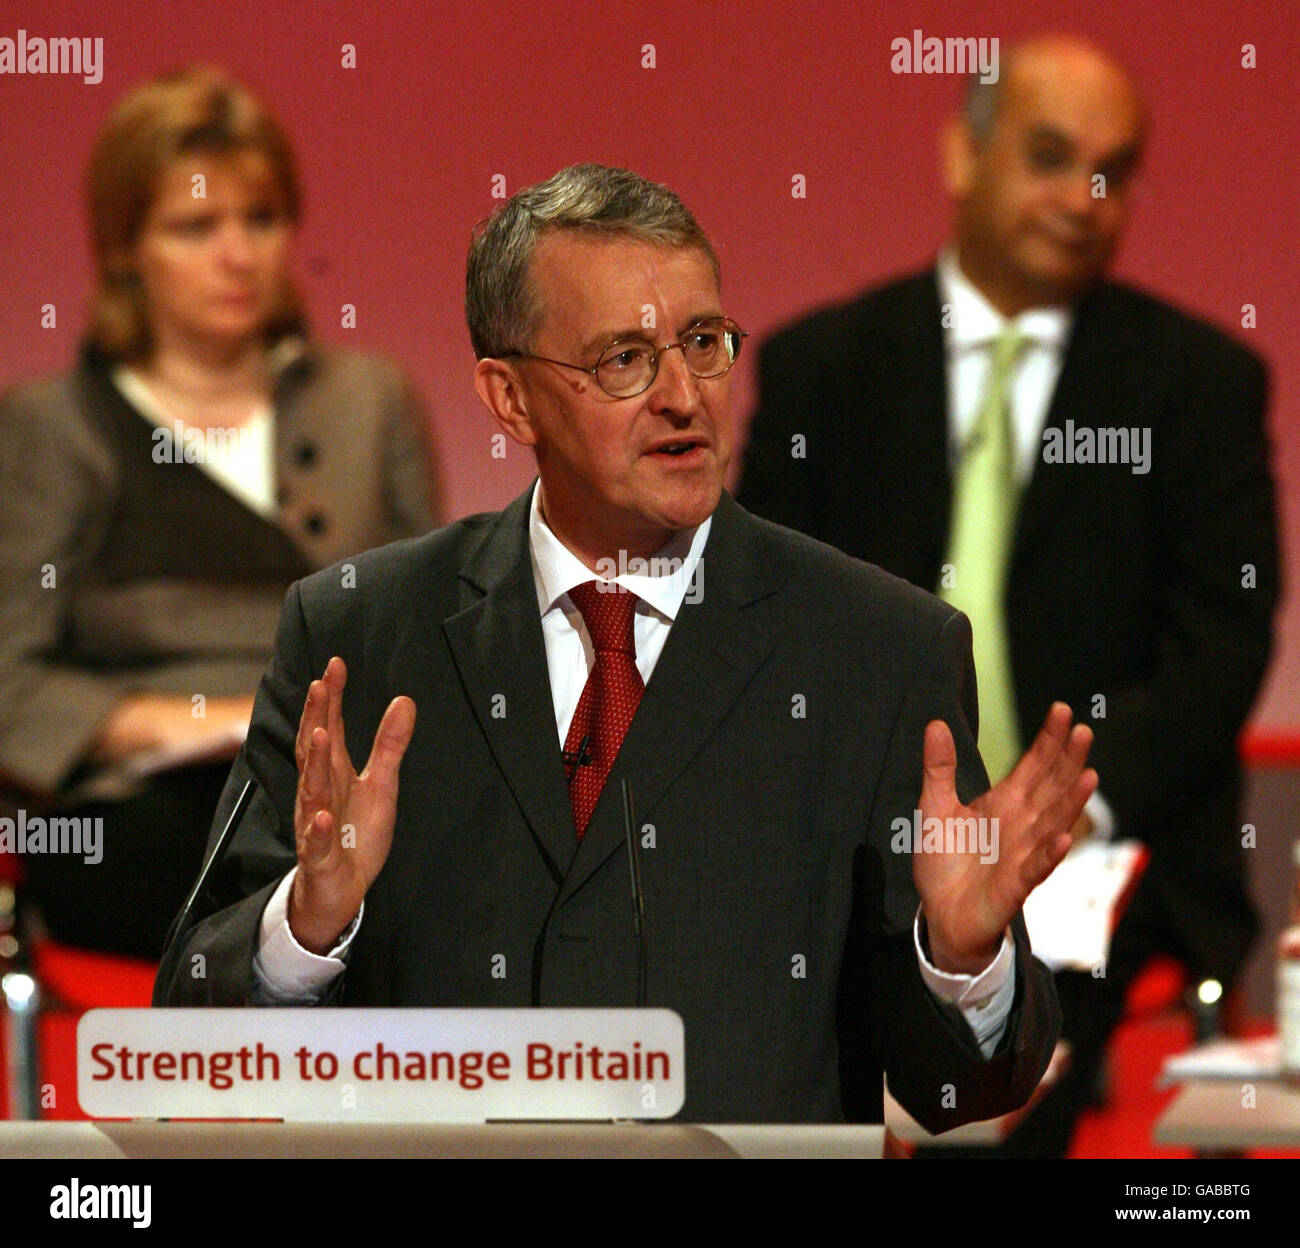 Secretary of State for Environment, Food and Rural Affairs Hilary Benn addresses the 2007 Labour Party Conference at the Bournemouth International Centre, Dorset watched by Ruth Kelly and Keith Vaz. Stock Photo